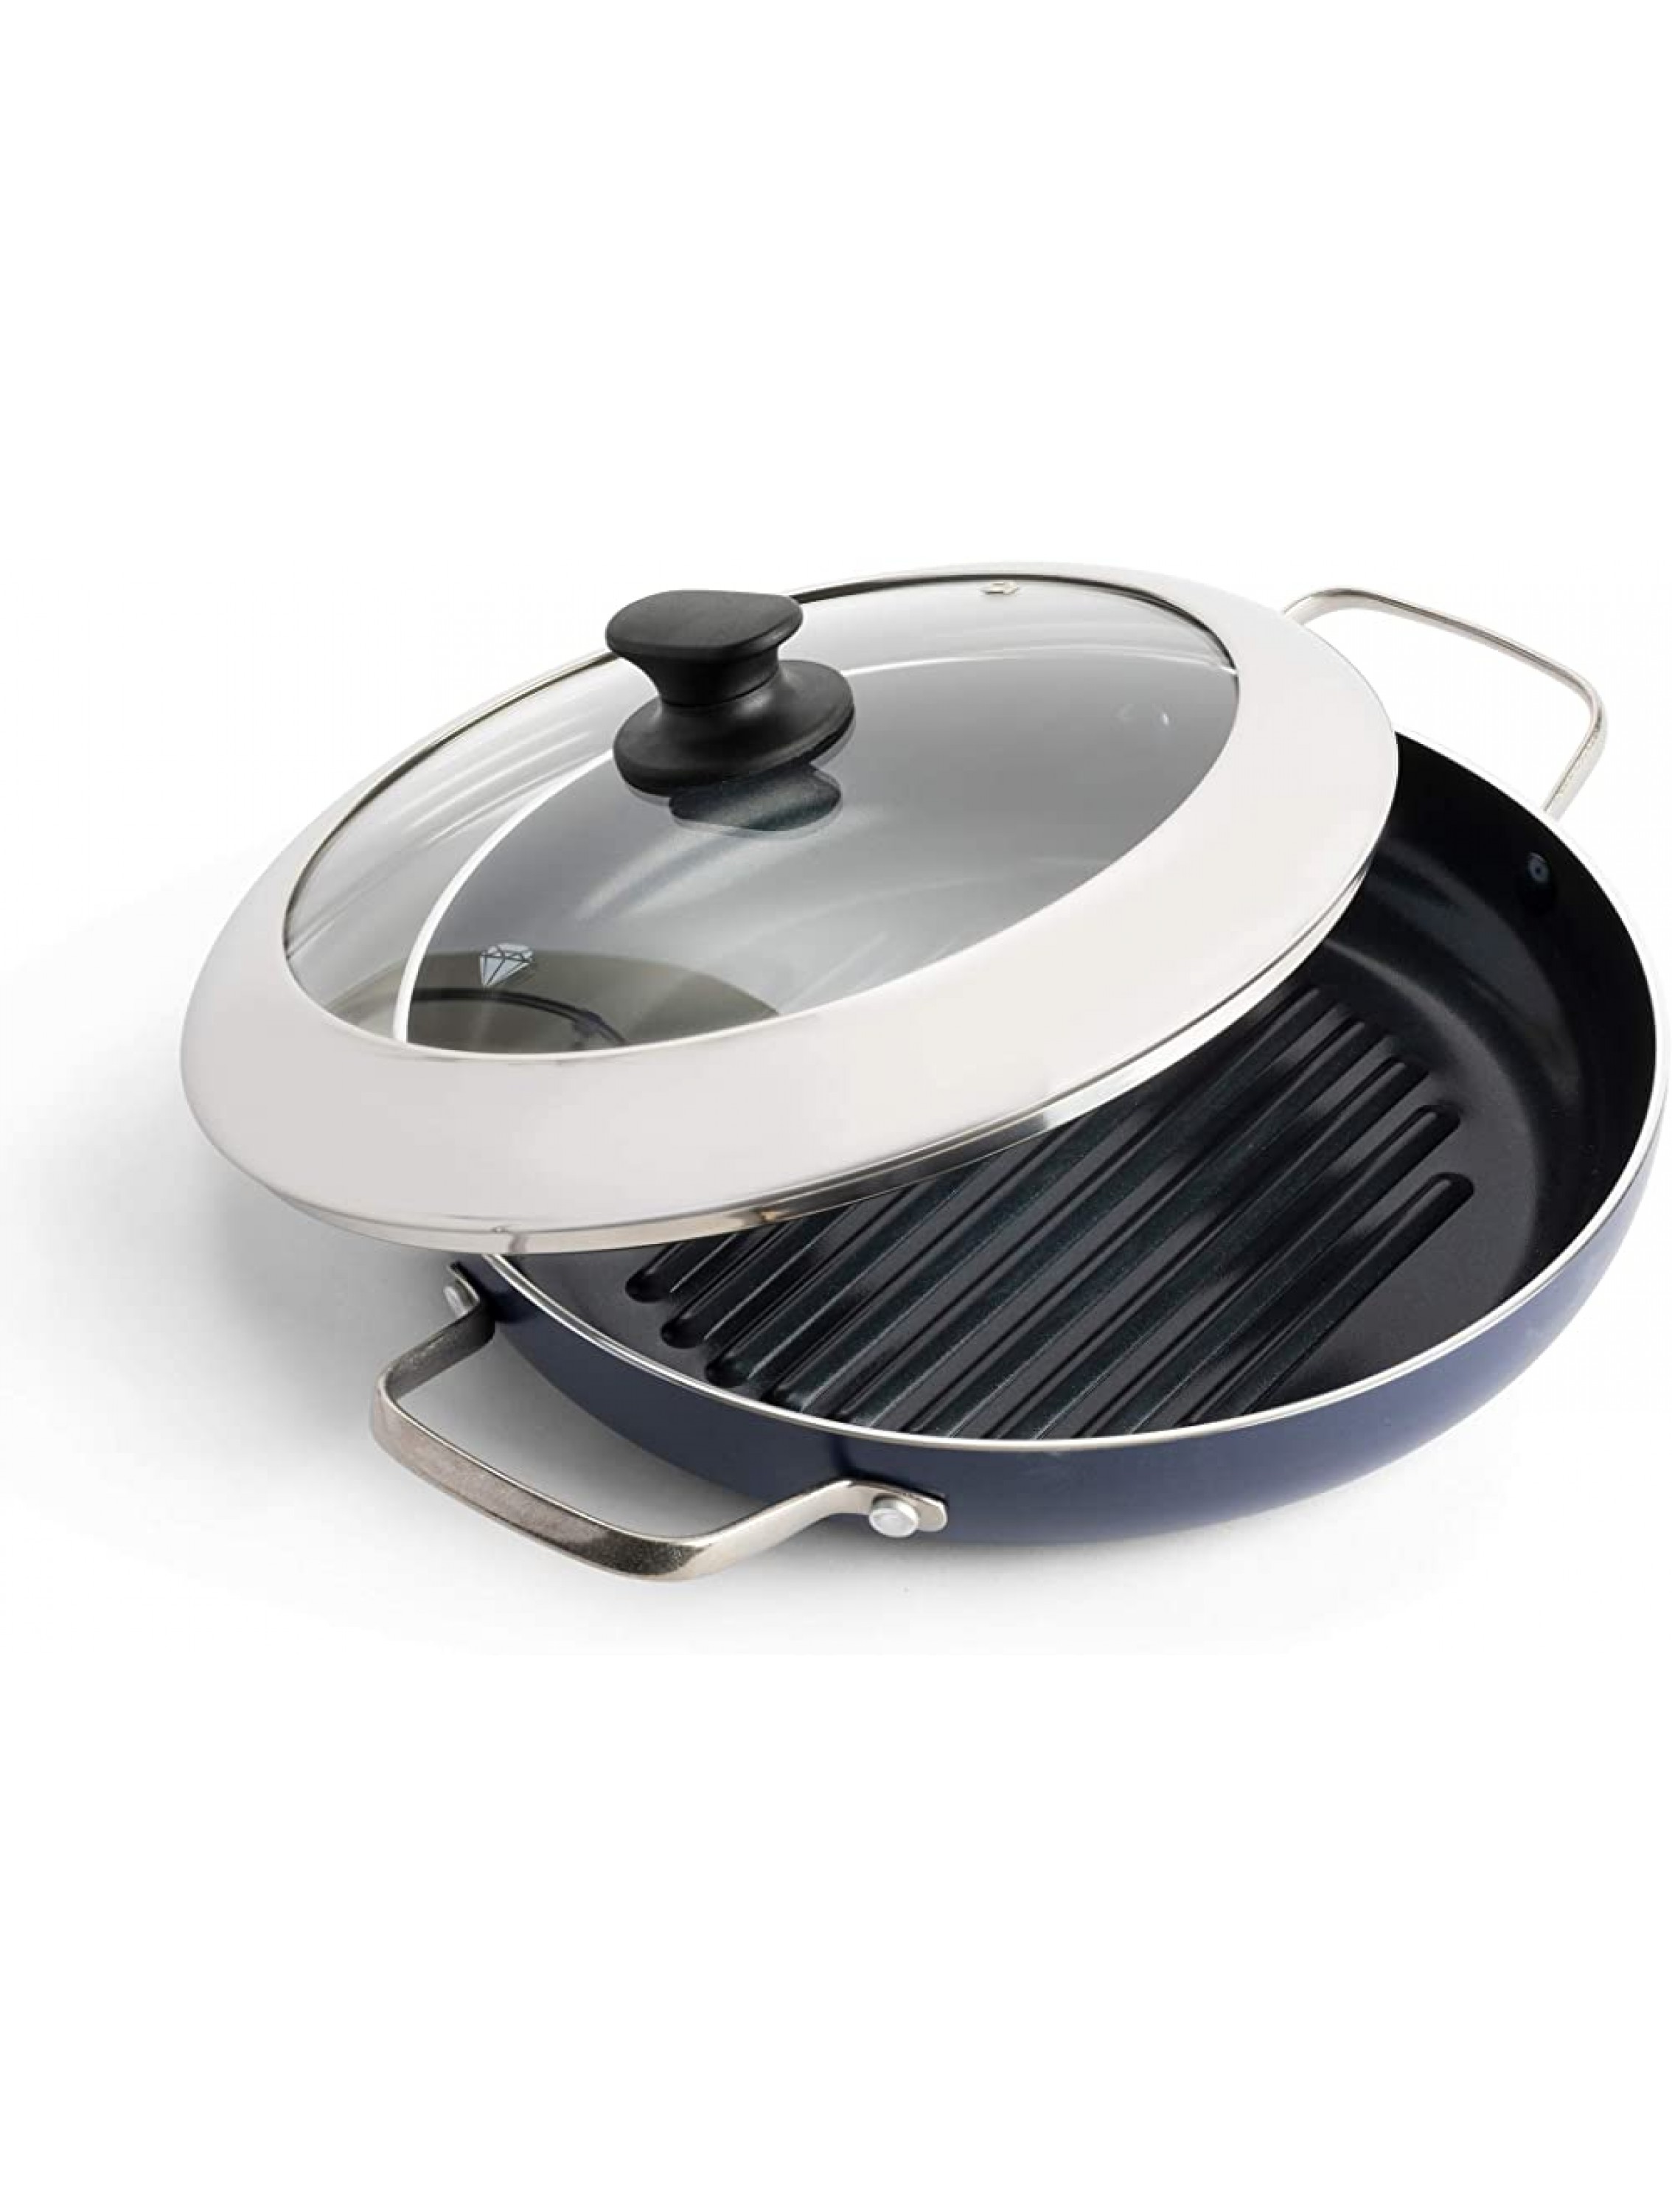 Blue Diamond Cookware Diamond Infused Ceramic Nonstick 11 Grill Genie Pan with Lid PFAS-Free Dishwasher Safe Oven Safe Blue - BJPP0H0NT